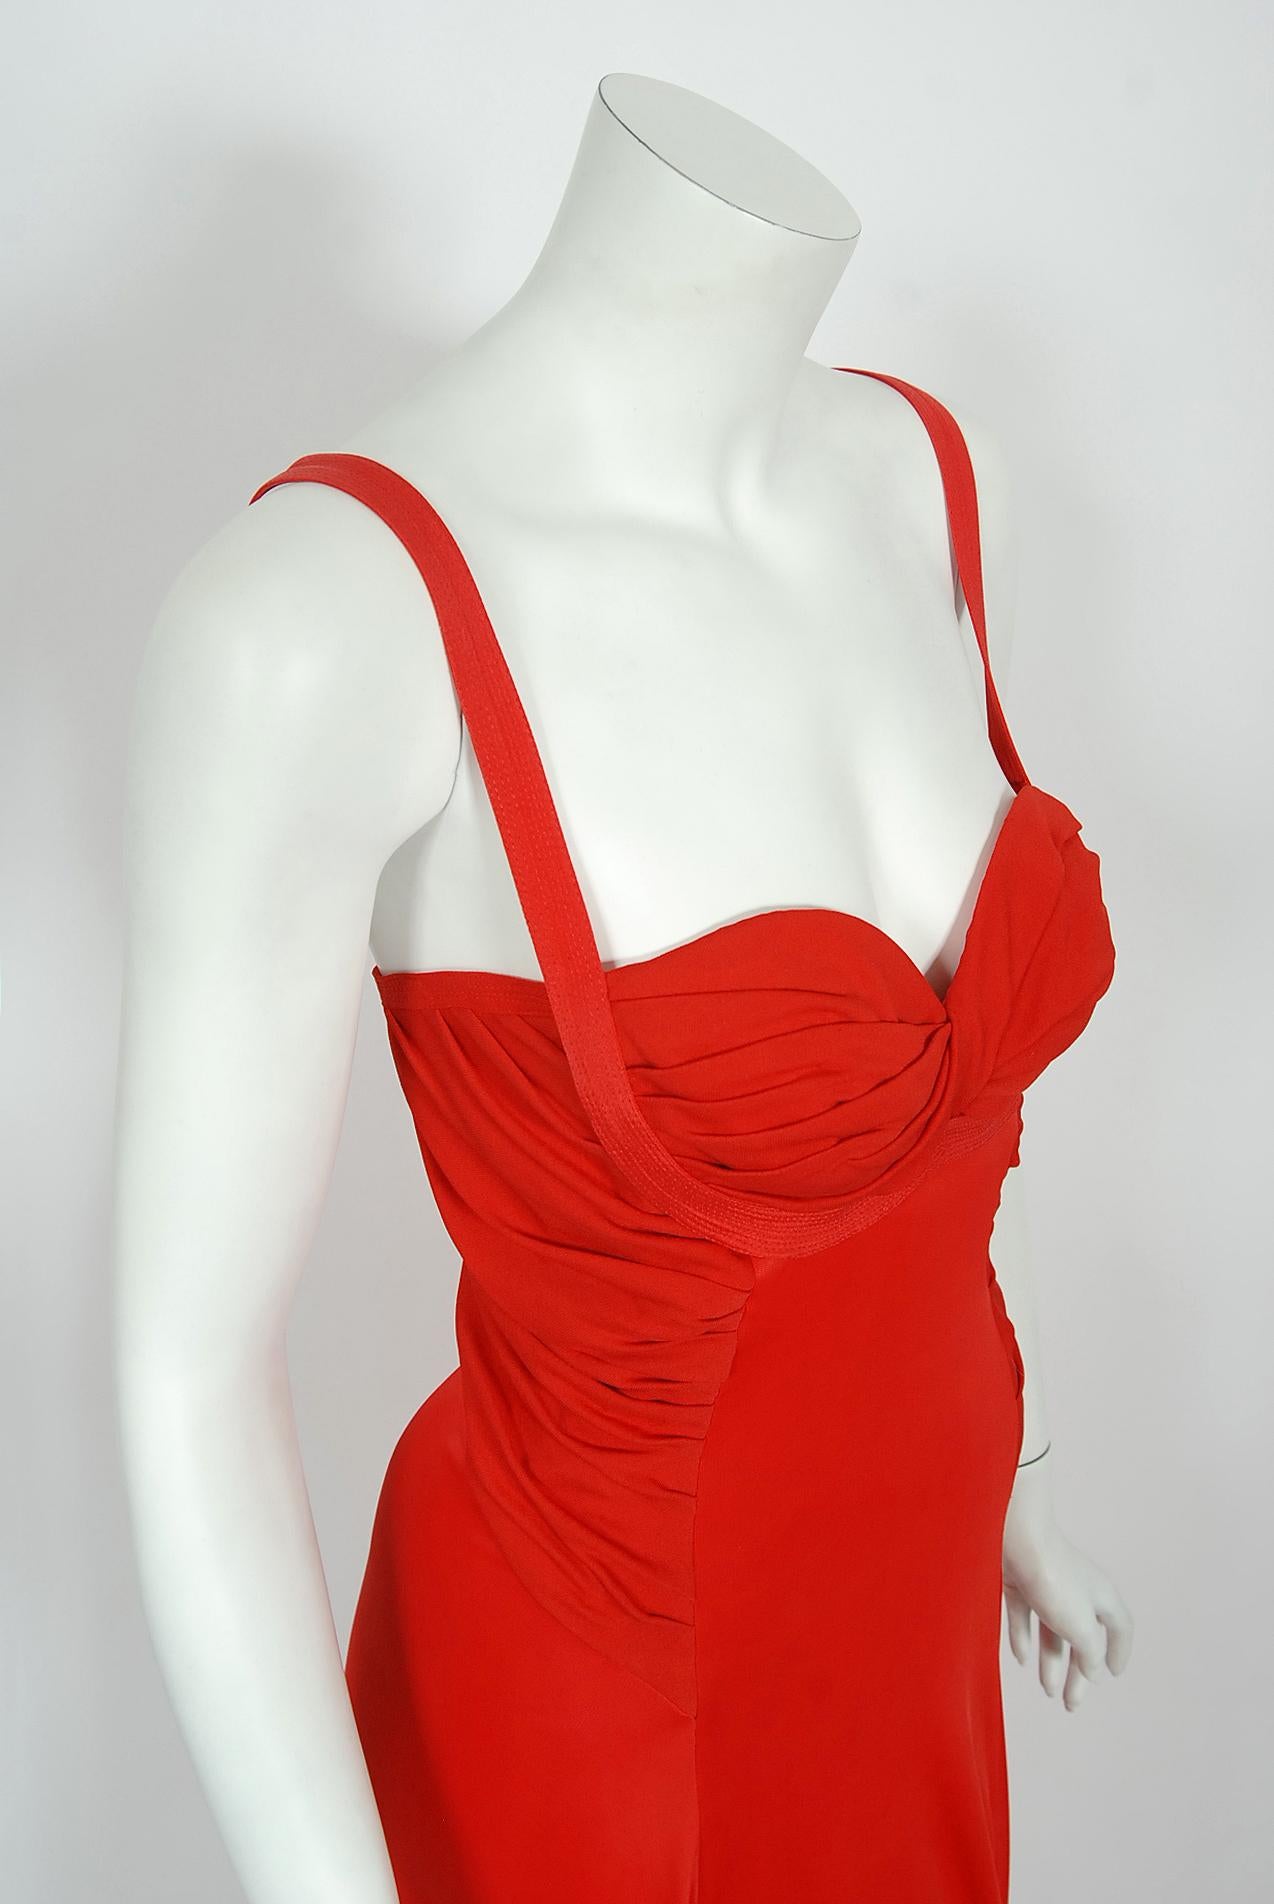 Vintage 1993 Gianni Versace Couture Documented Red Silk Bustier High-Slits Gown 5